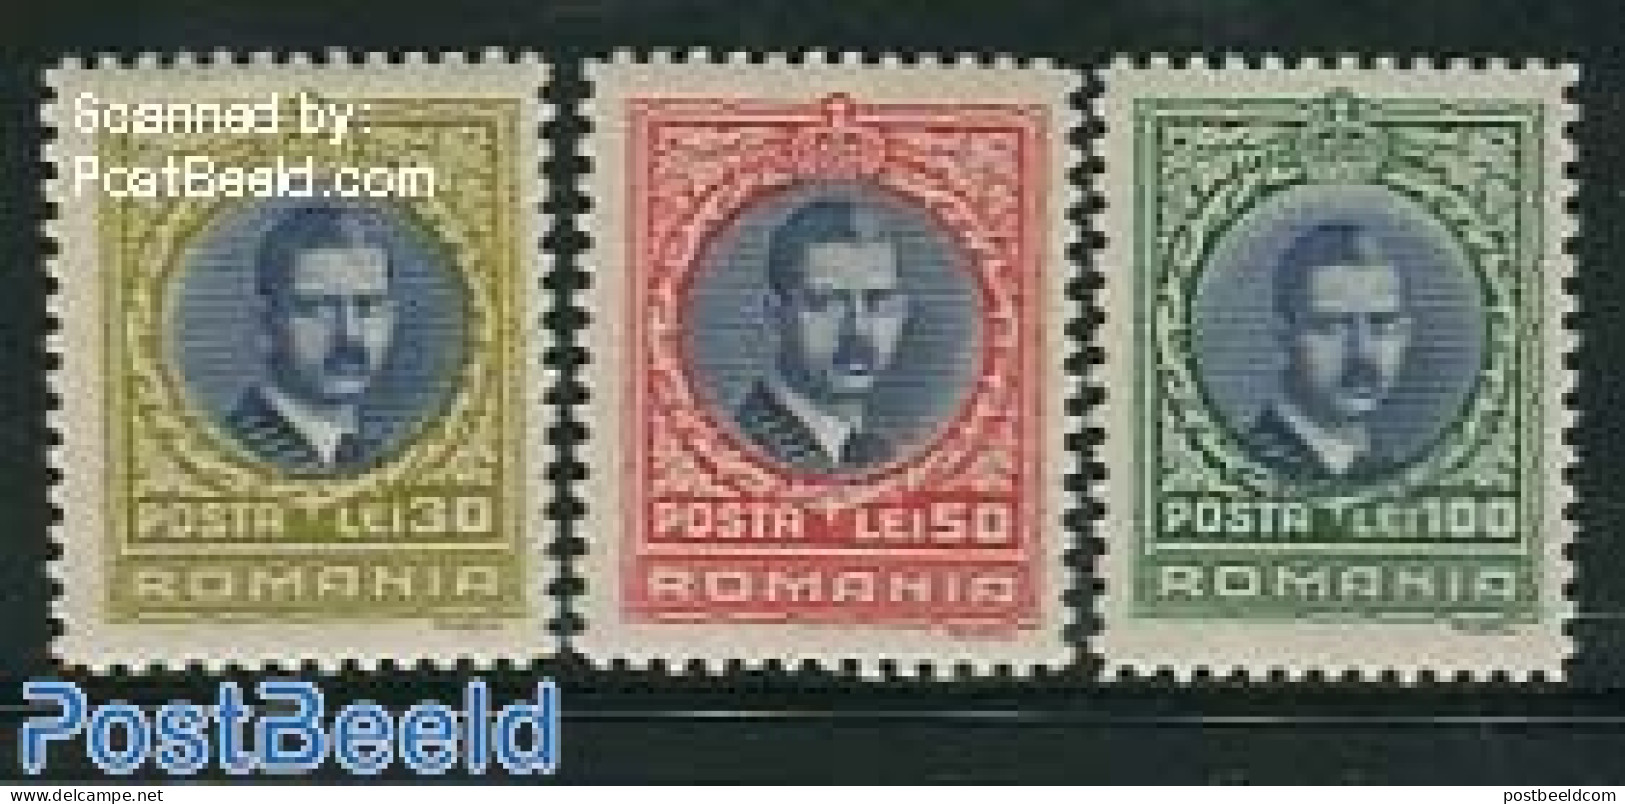 Romania 1931 Definitives 3v, Mint NH - Unused Stamps